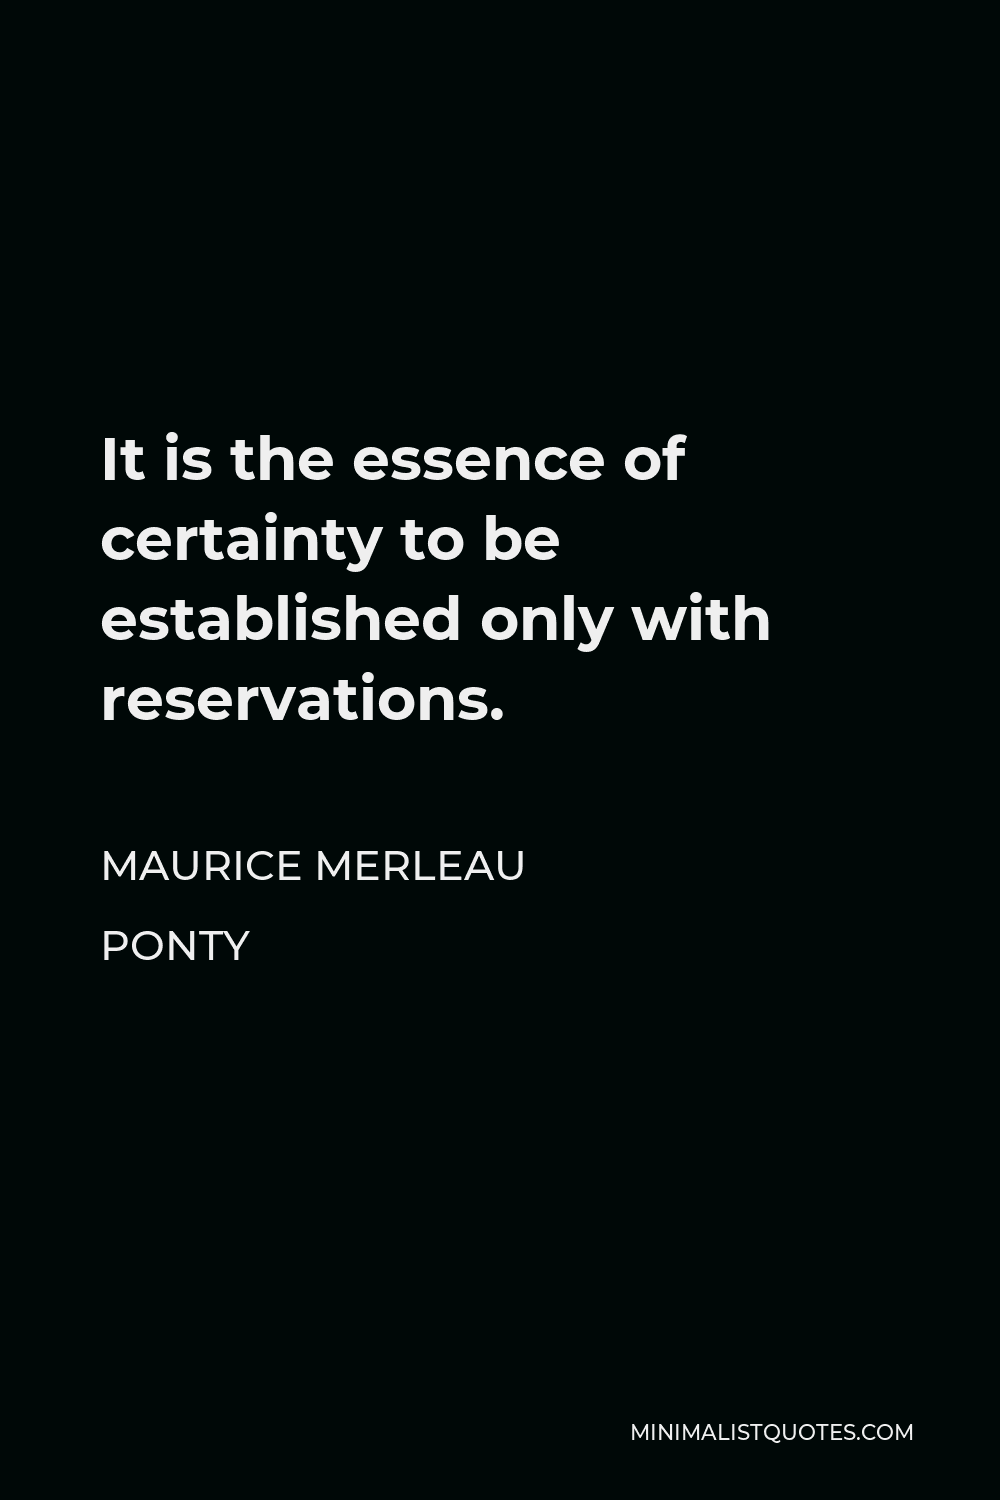 Maurice Merleau Ponty Quote - It is the essence of certainty to be established only with reservations.